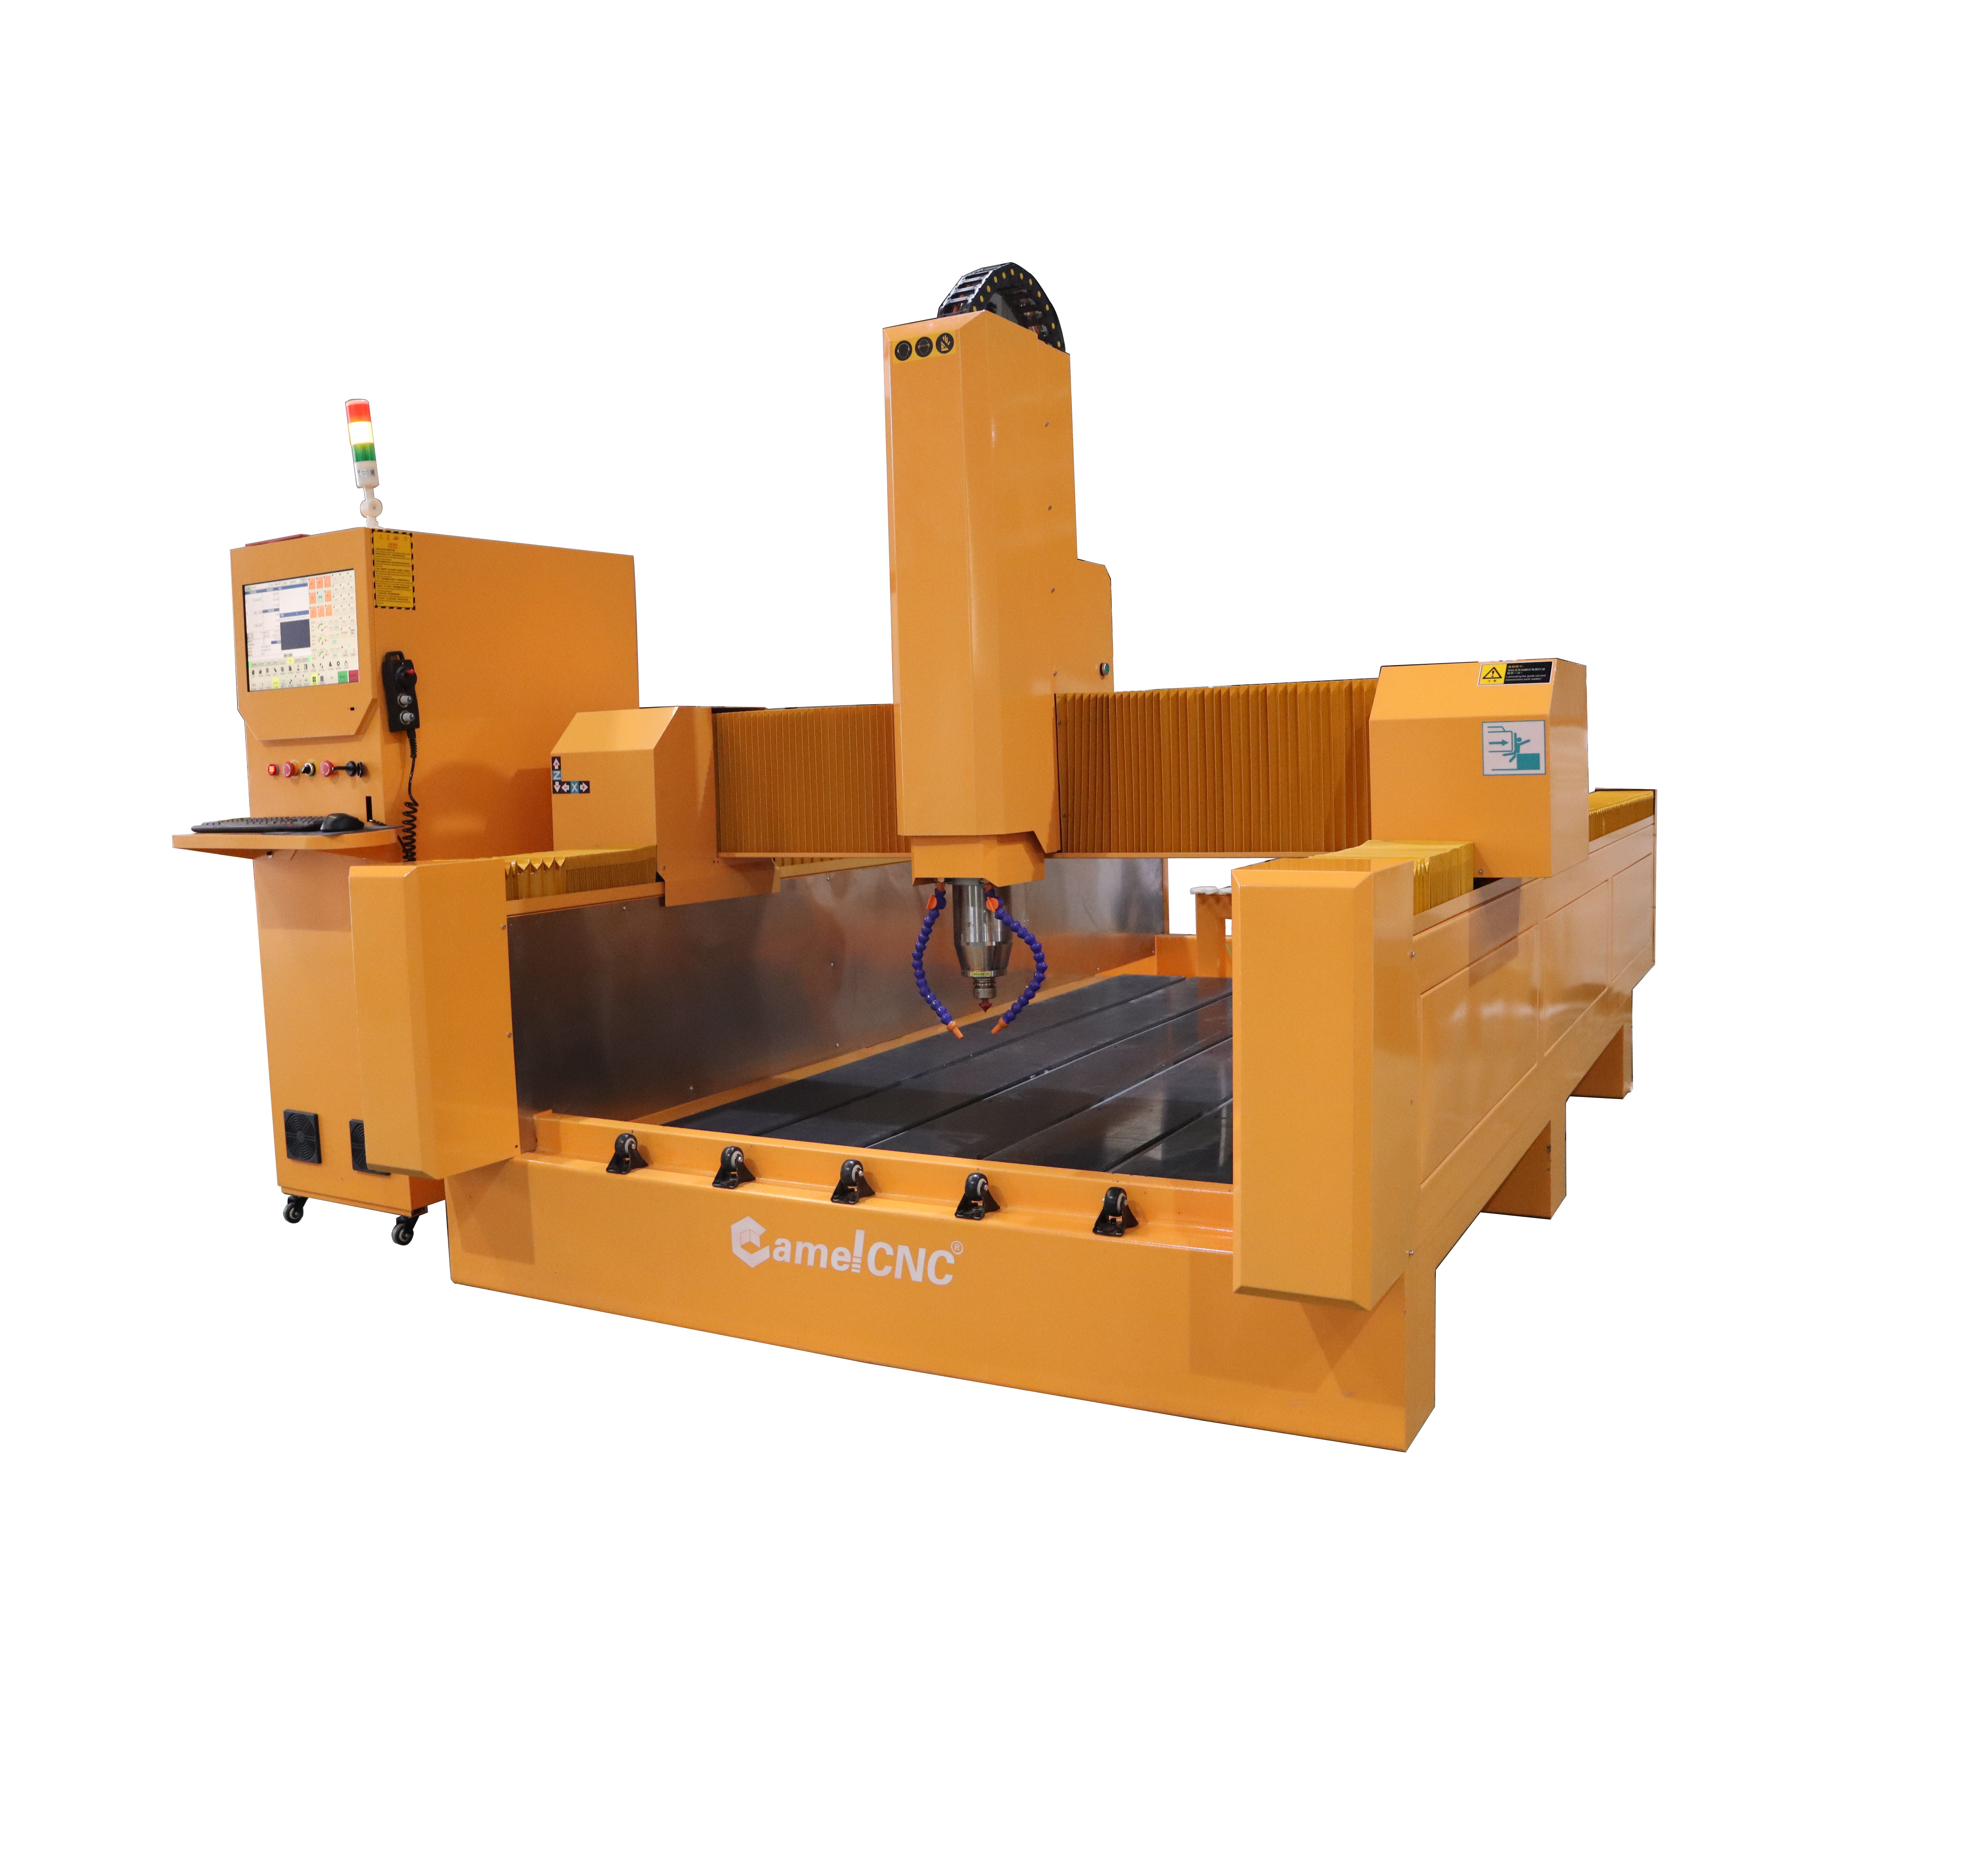 How to choose a stone machine?